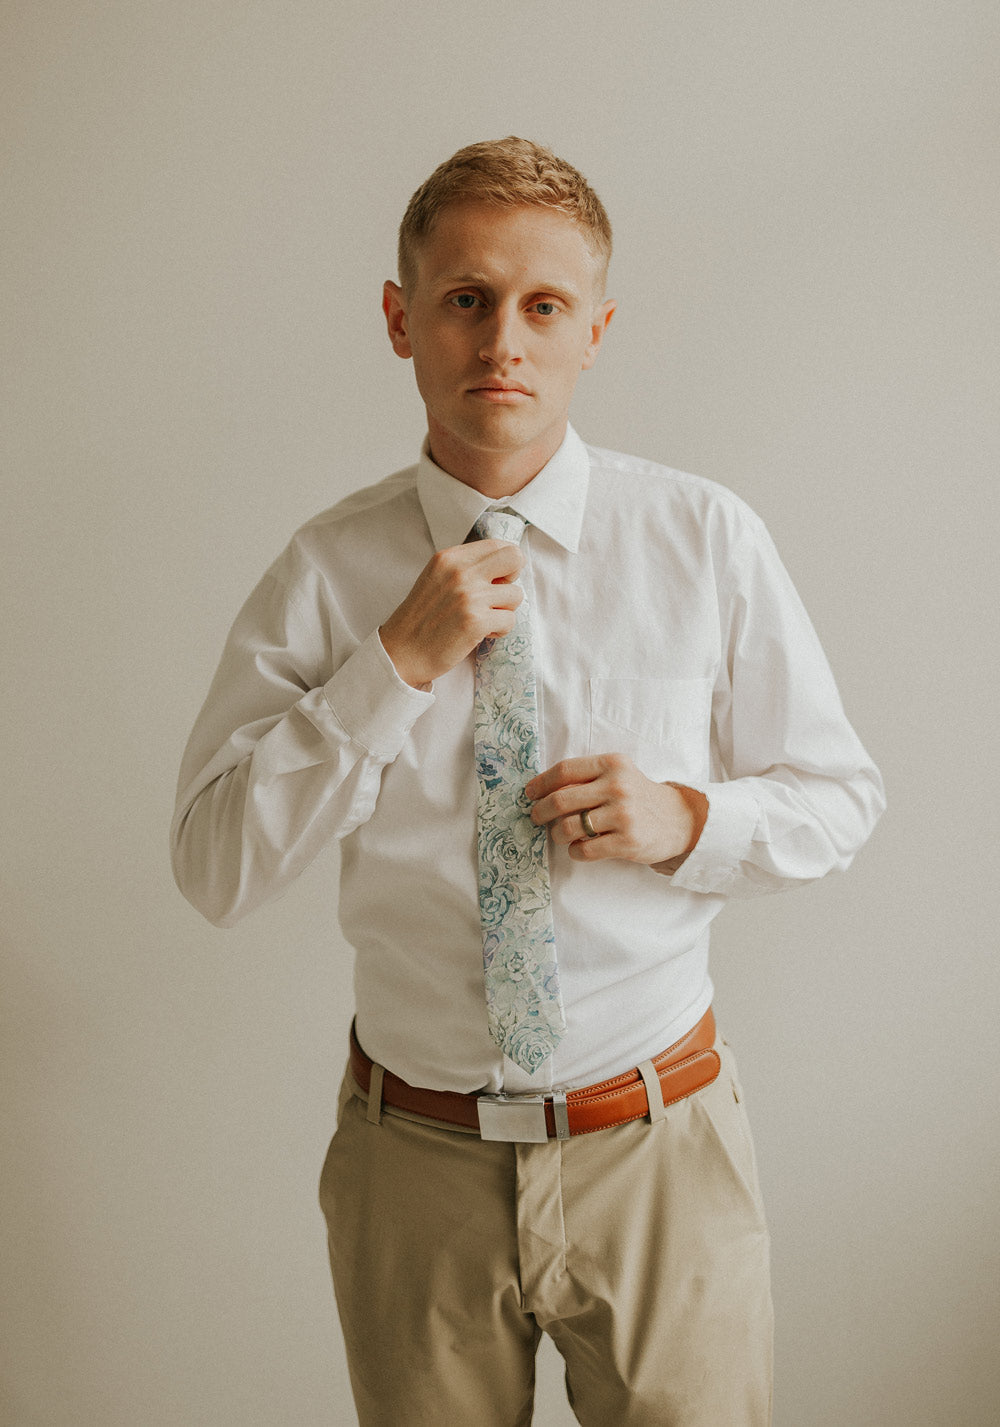 Crested Sunburst tie worn with a white shirt, brown belt and khaki pants.